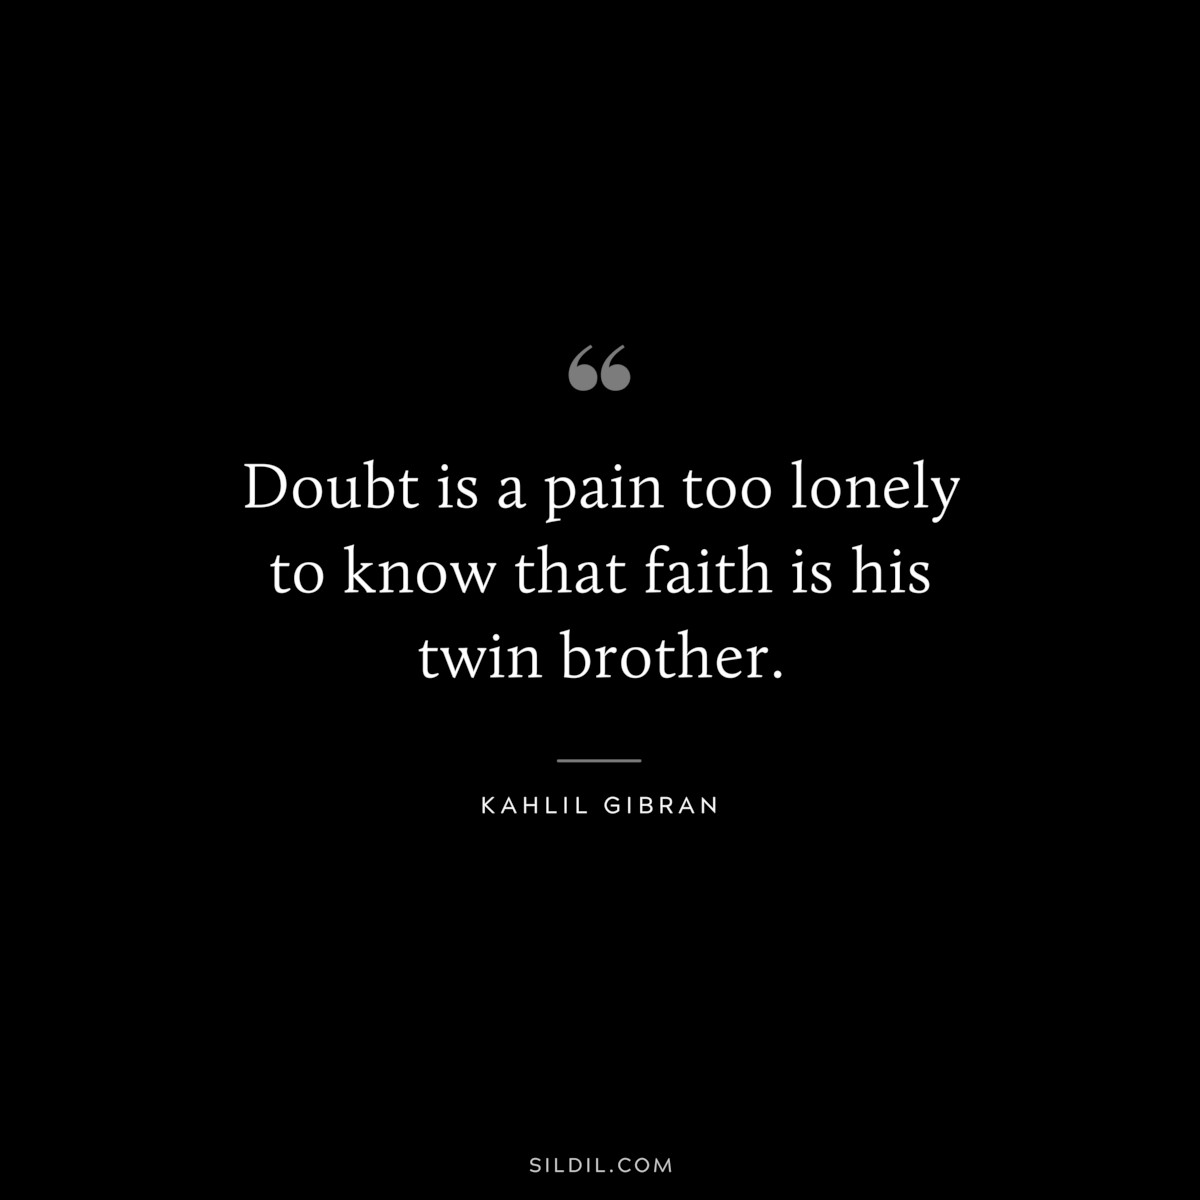 Doubt is a pain too lonely to know that faith is his twin brother. ― Kahlil Gibran